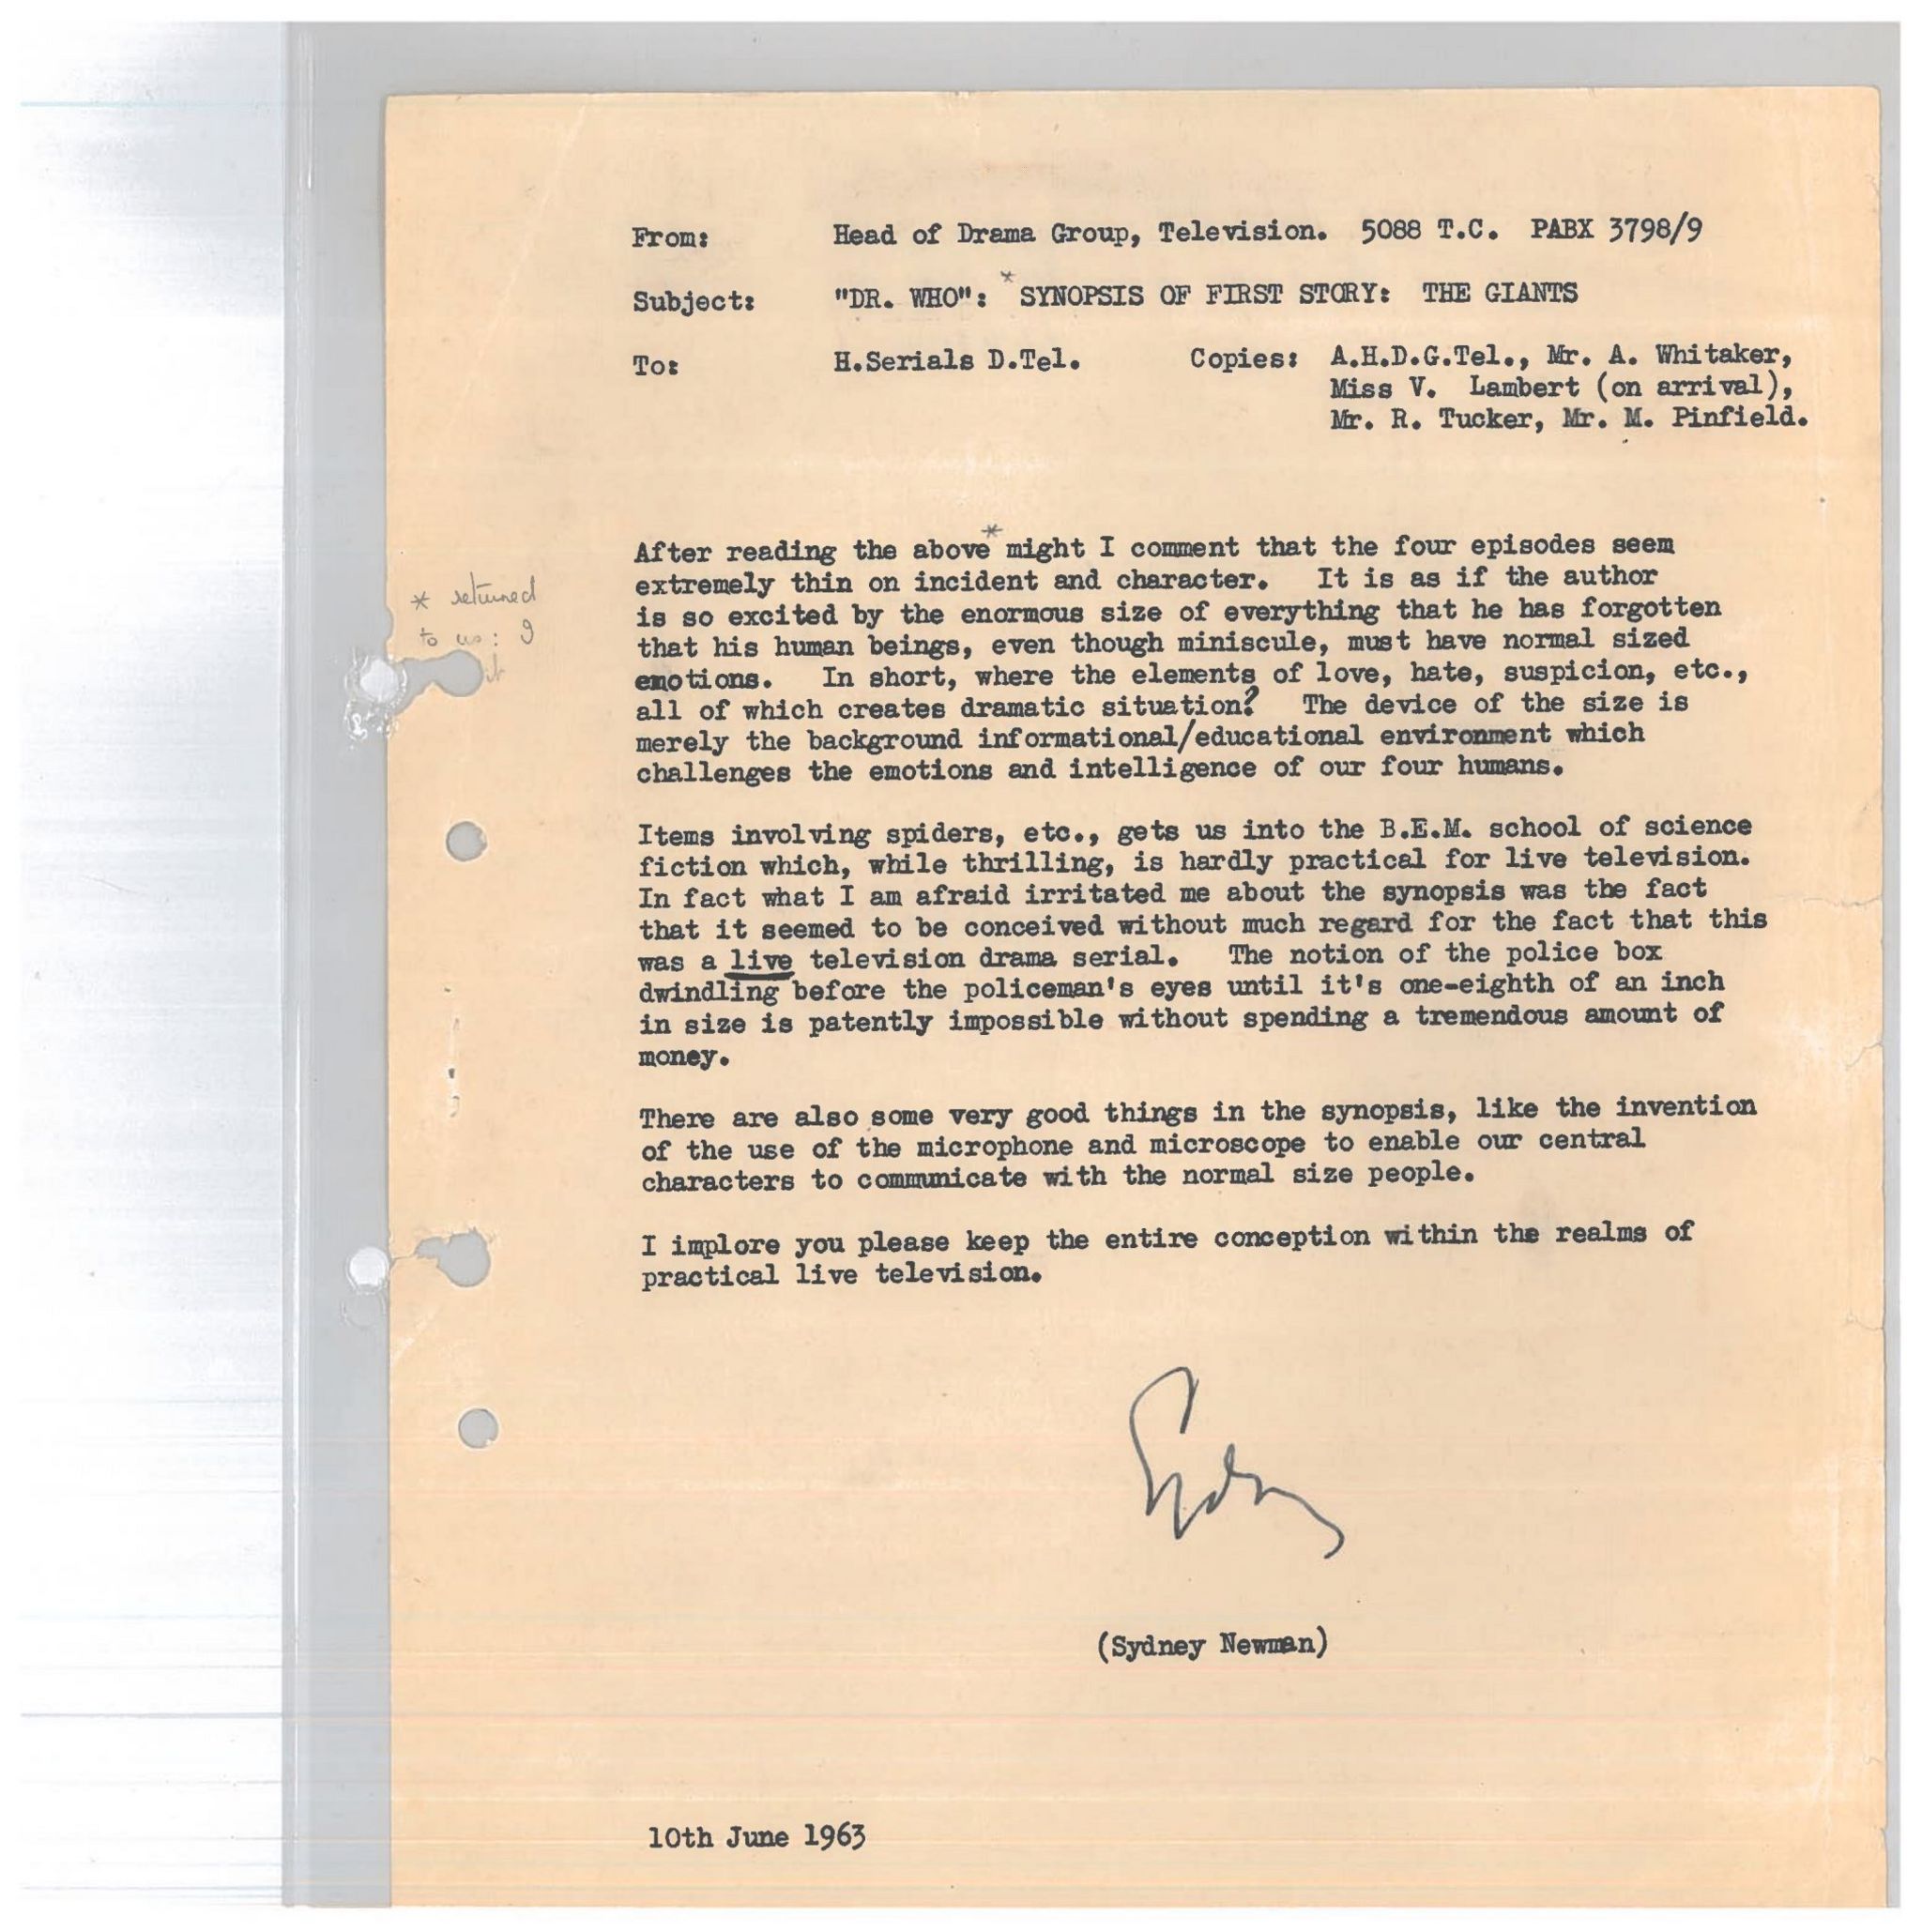 A letter dated the 10th June 1963 from Dr Who creator Sydney Newman 